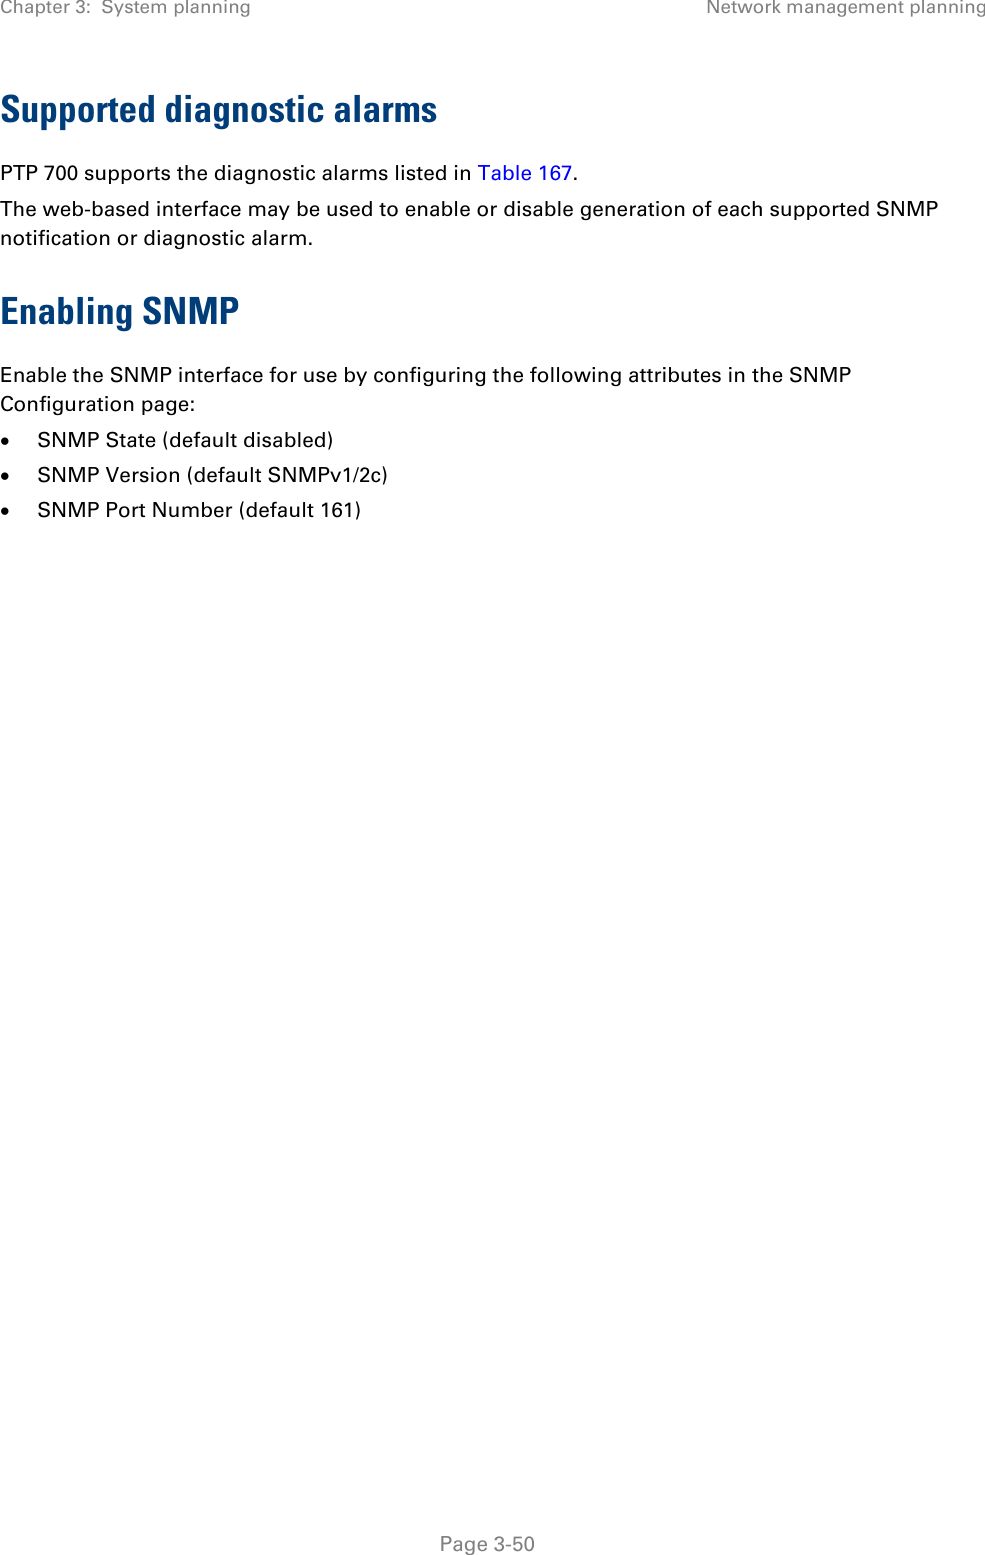 Chapter 3:  System planning Network management planning  Supported diagnostic alarms PTP 700 supports the diagnostic alarms listed in Table 167. The web-based interface may be used to enable or disable generation of each supported SNMP notification or diagnostic alarm. Enabling SNMP Enable the SNMP interface for use by configuring the following attributes in the SNMP Configuration page: • SNMP State (default disabled) • SNMP Version (default SNMPv1/2c) • SNMP Port Number (default 161)     Page 3-50 